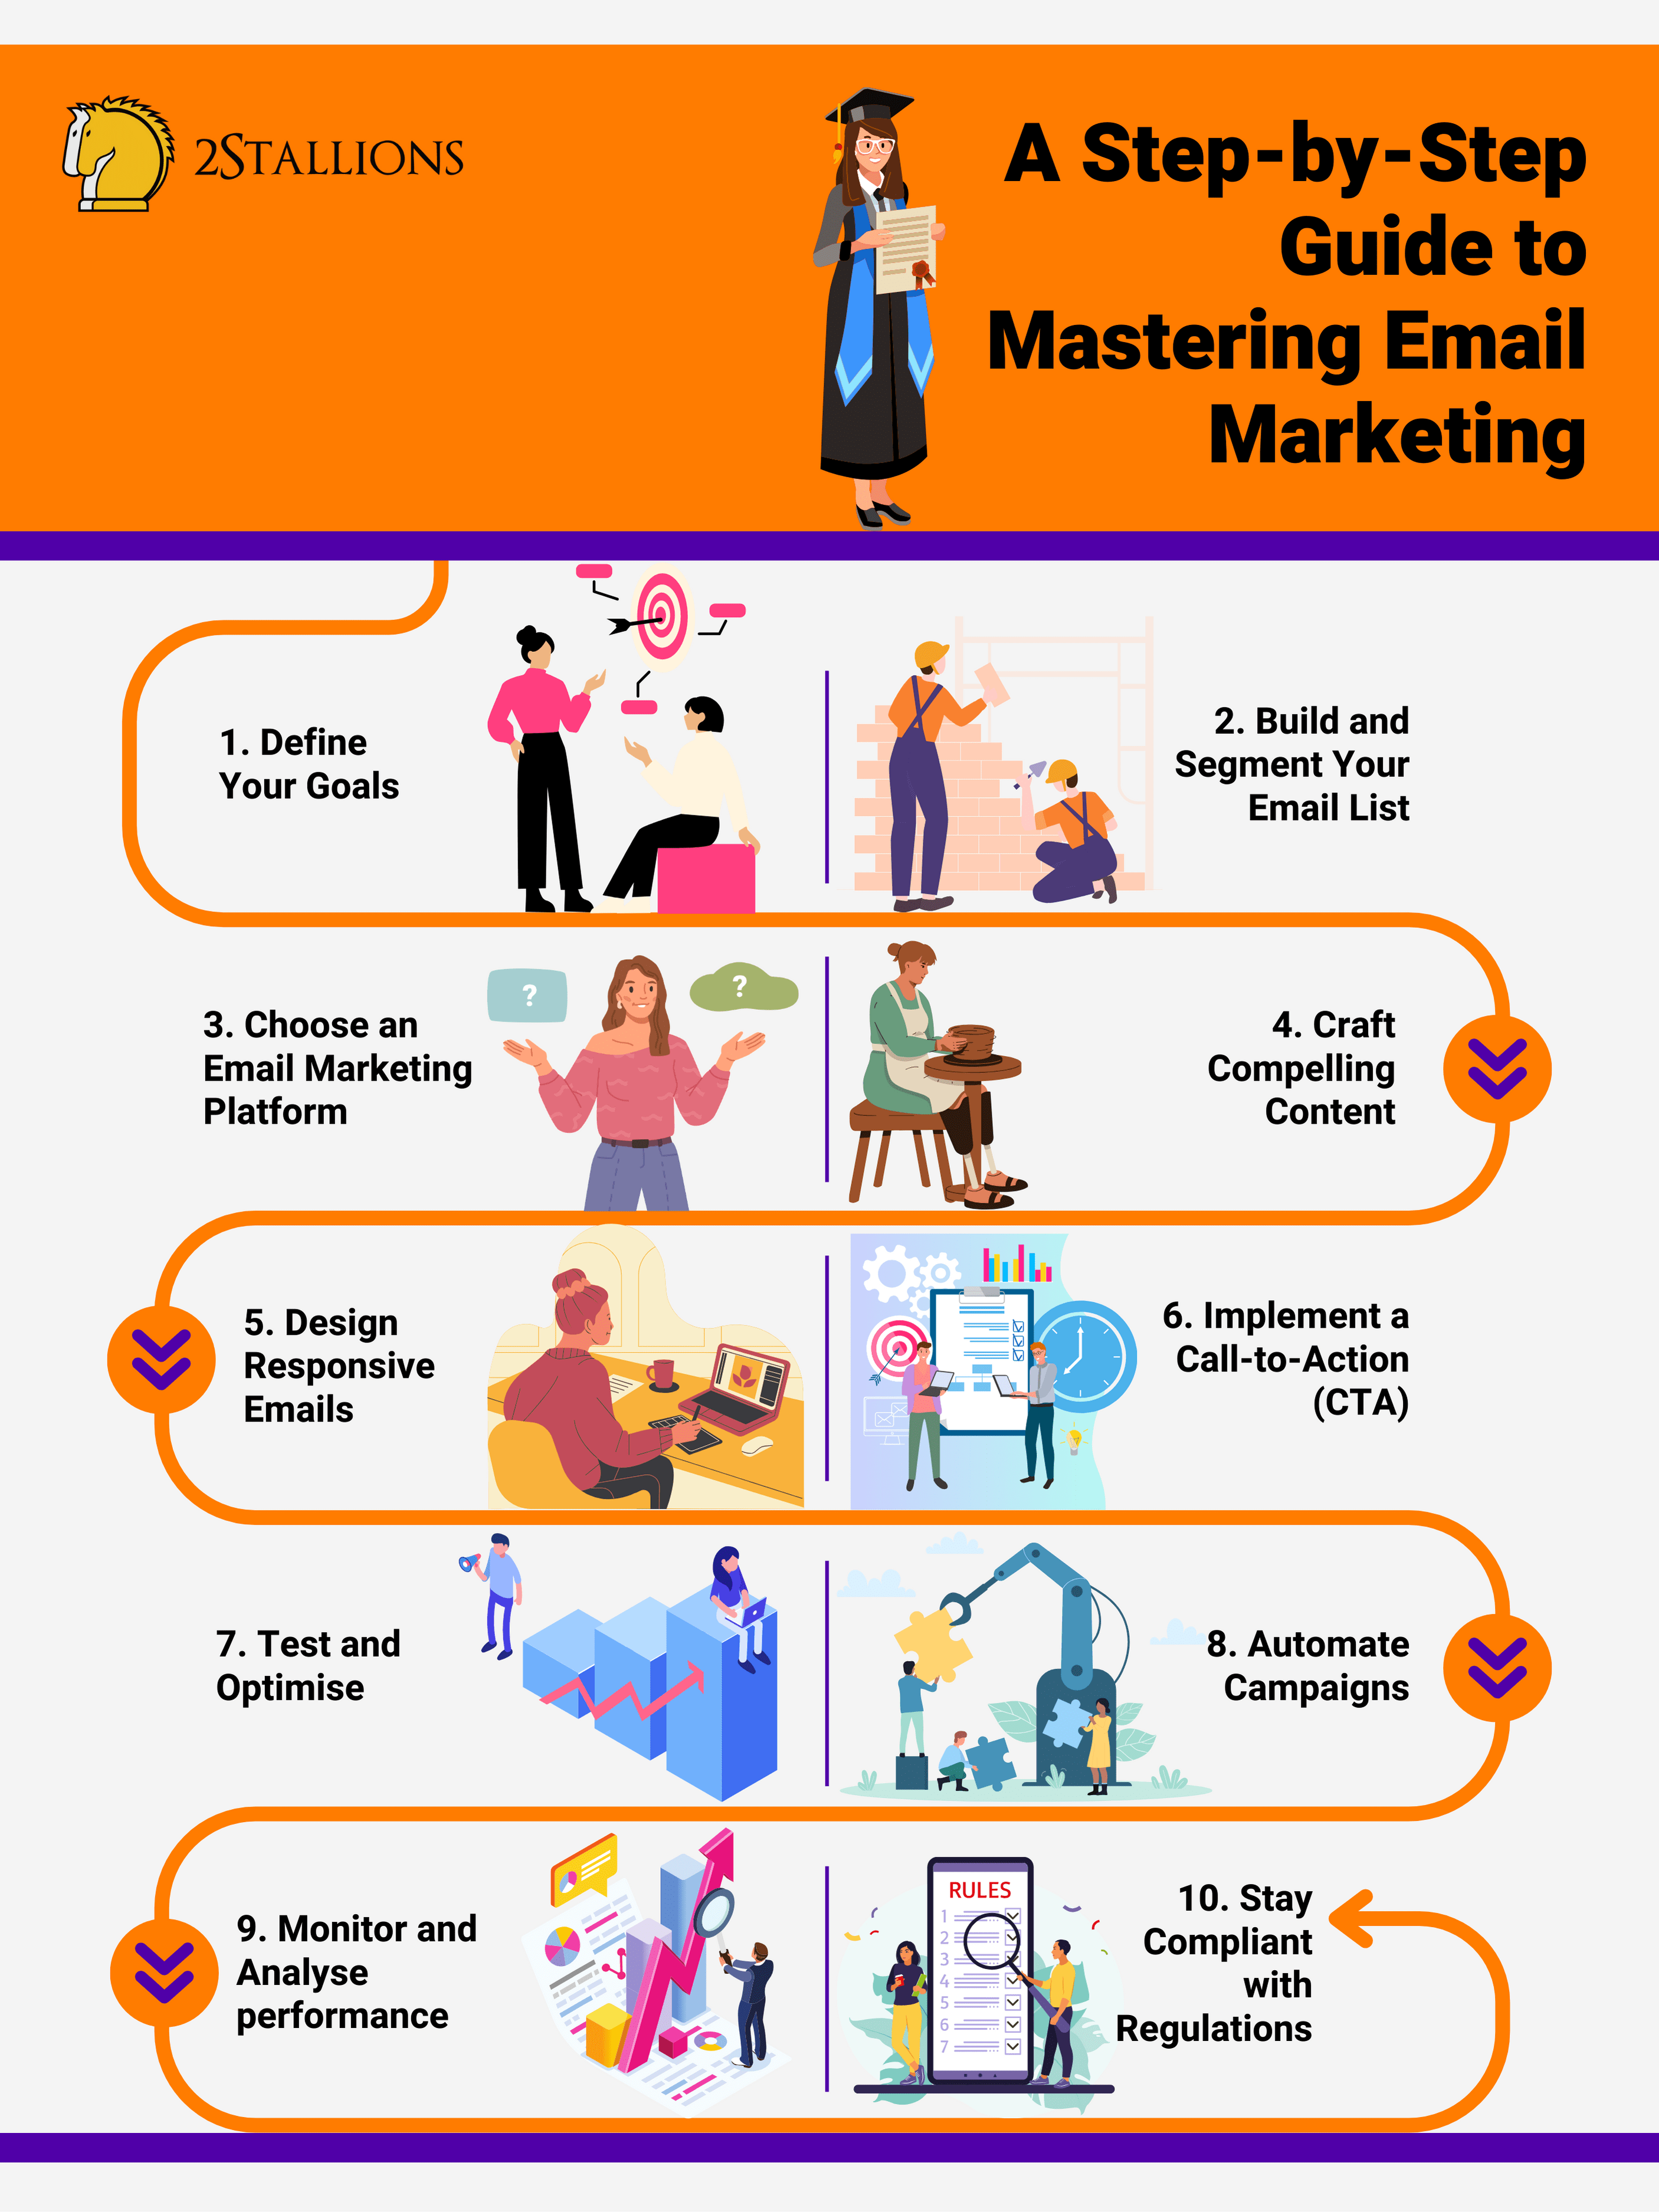 A Step-by-Step Guide to Mastering Email Marketing | 2Stallions